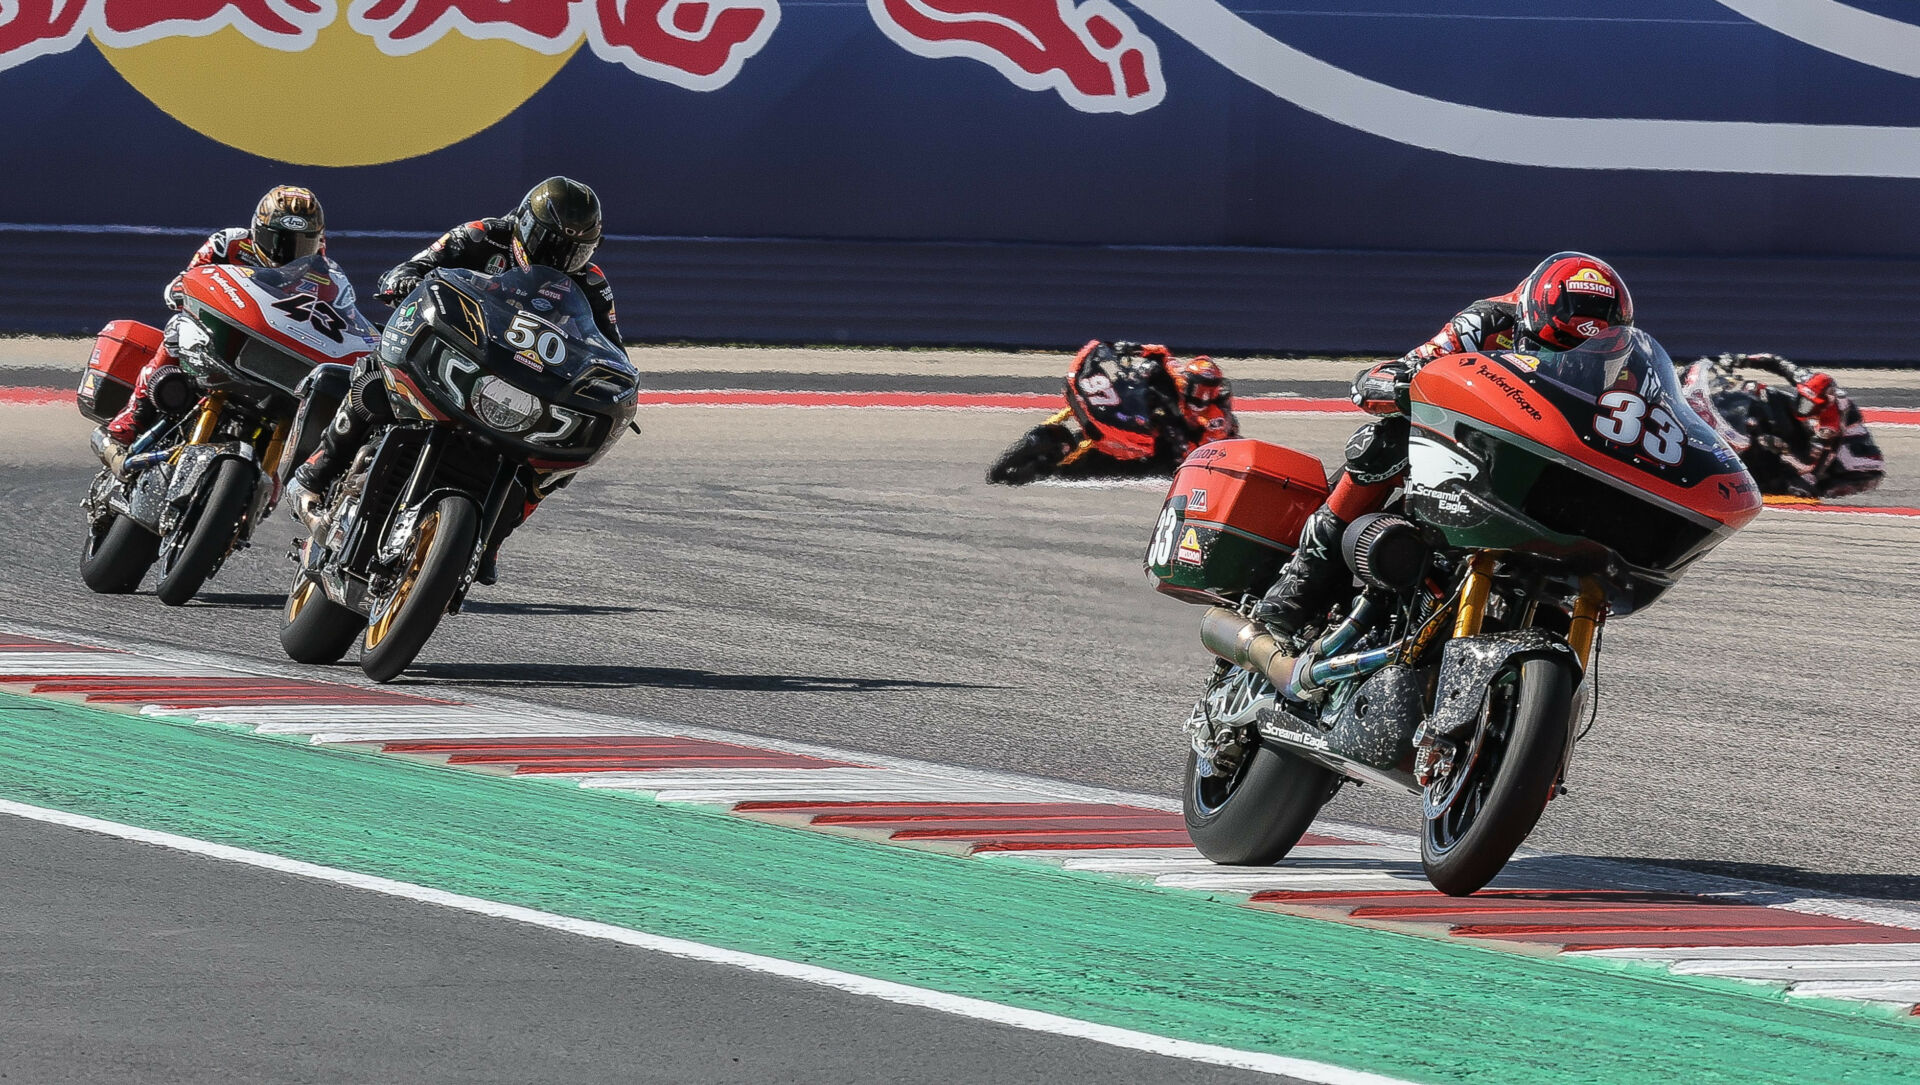 Kyle Wyman (33) leads Bobby Fong (50) and James Rispoli (43) at Circuit of The Americas. Photo by Brian J. Nelson, courtesy Harley-Davidson.